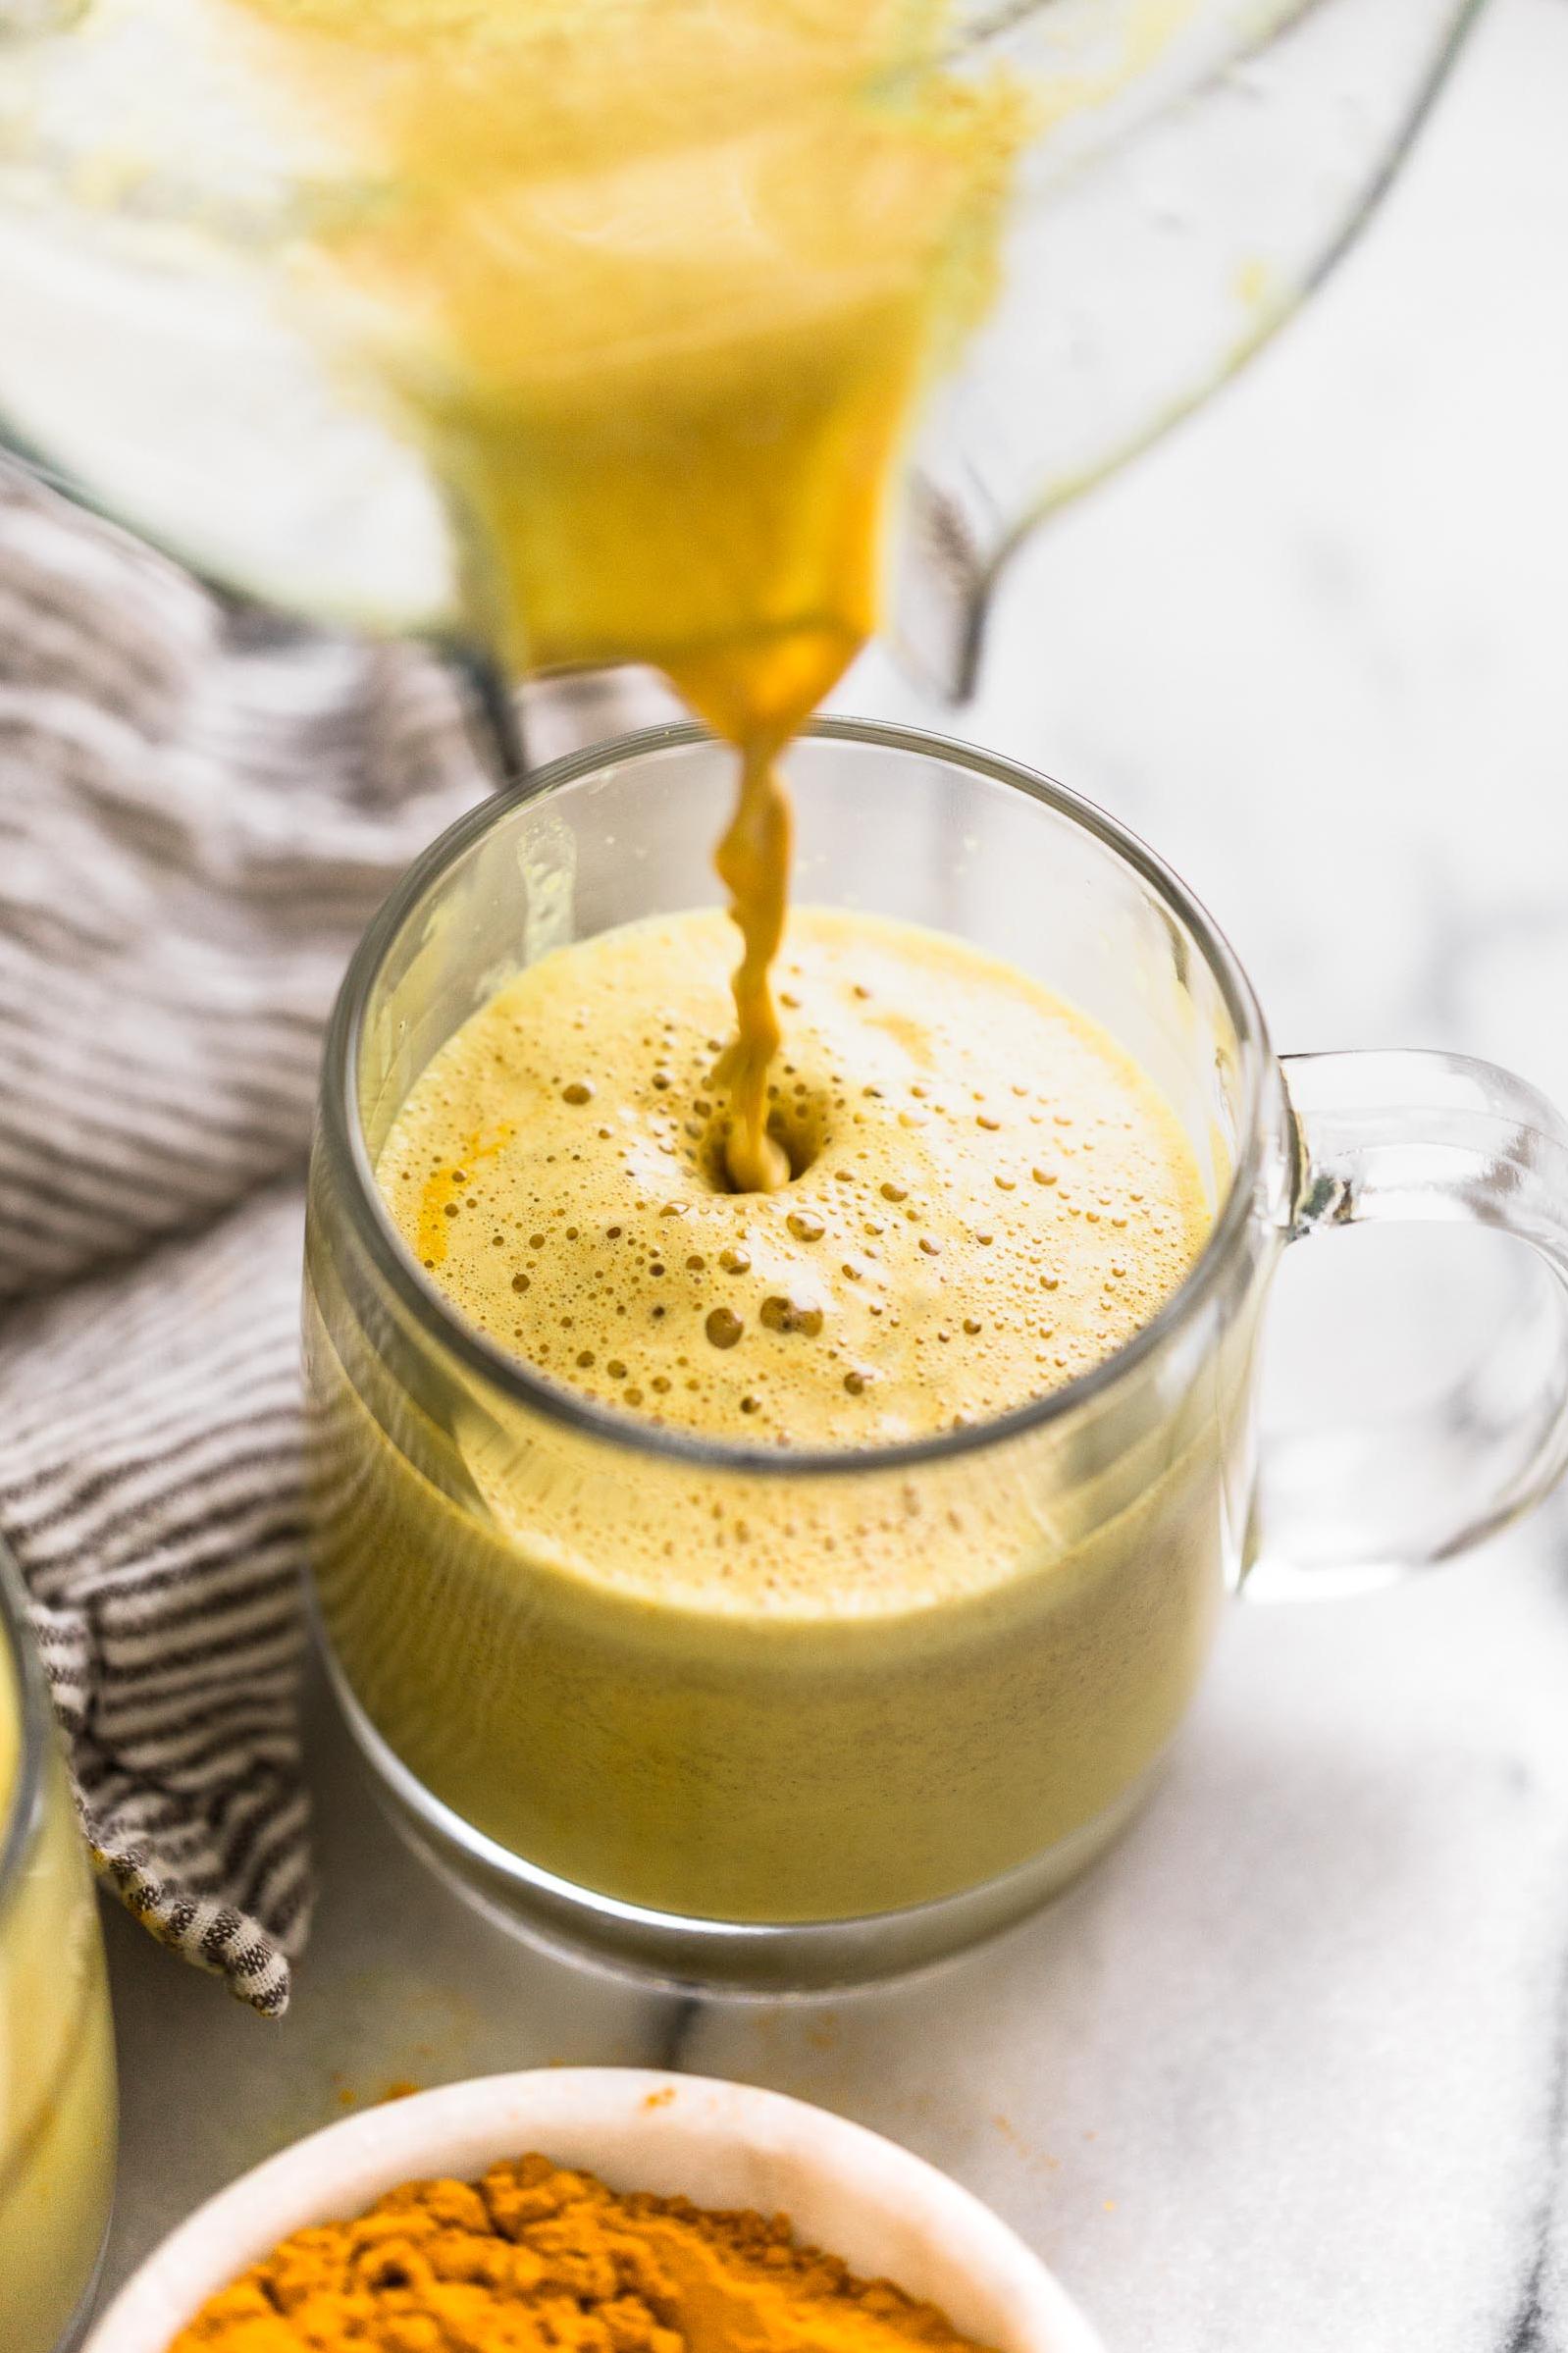  Sip on sunshine with our warming turmeric latte ☀️✨